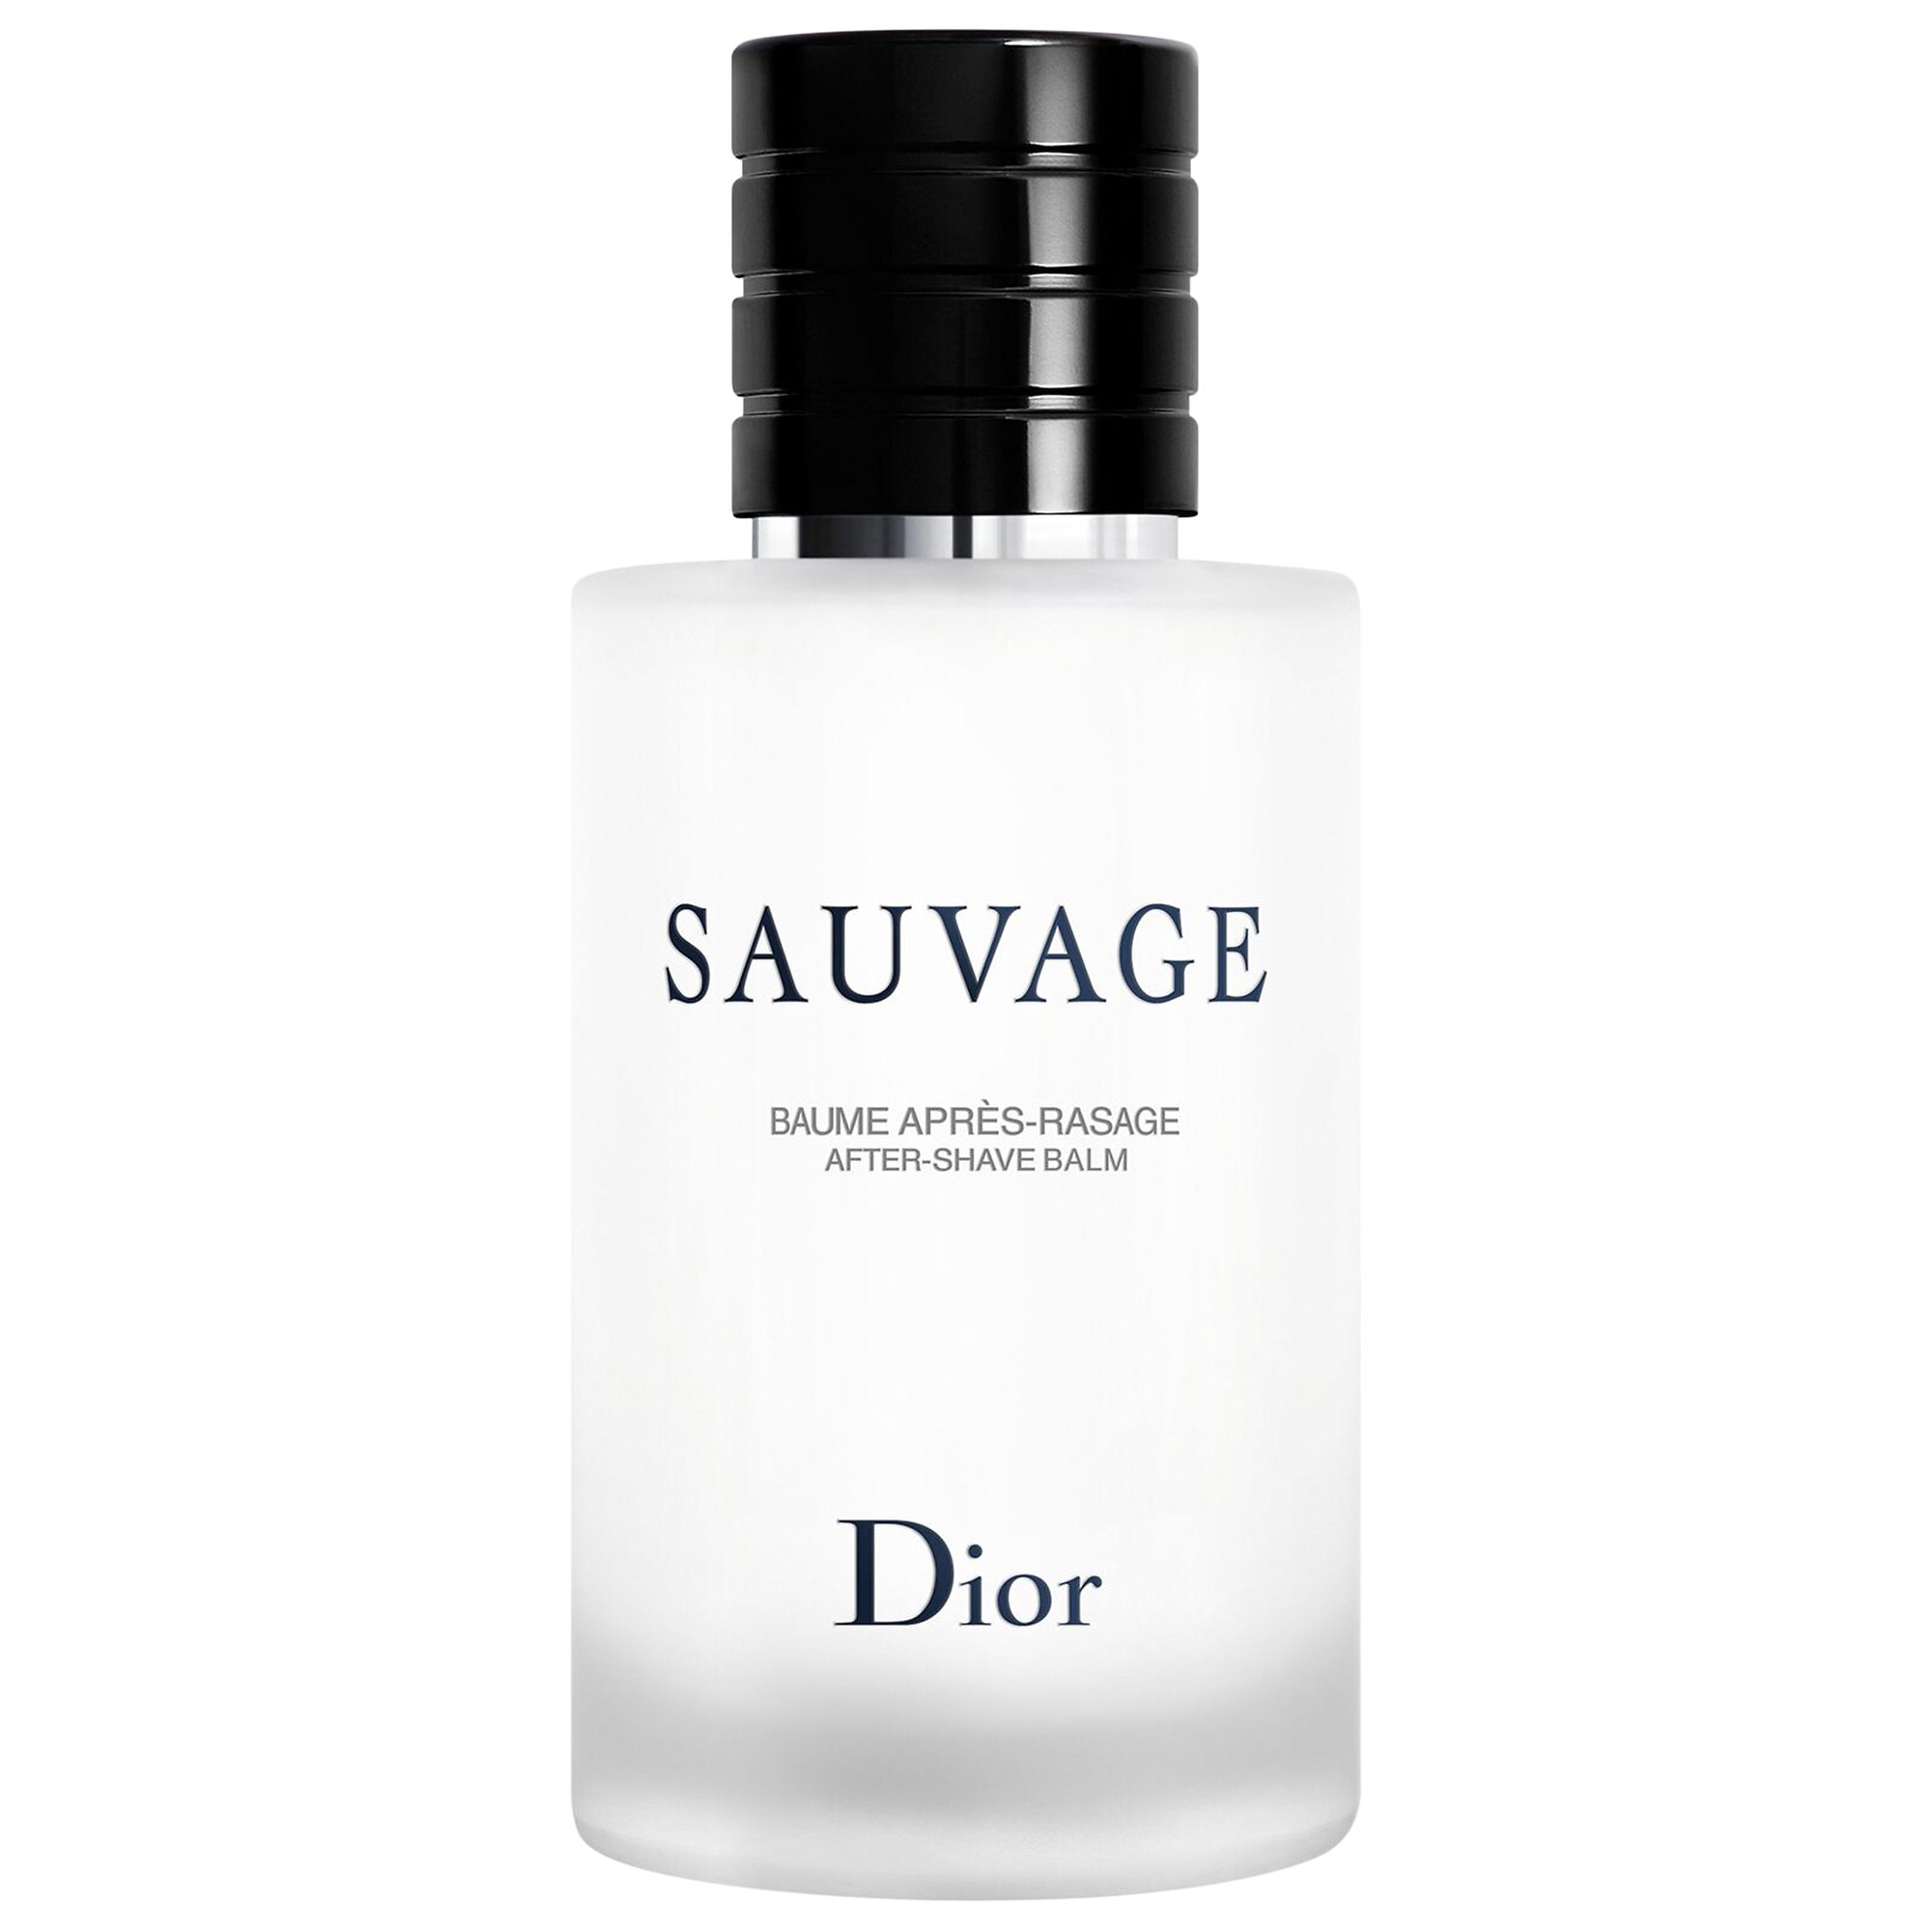 Sauvage After Shave Balm Dior